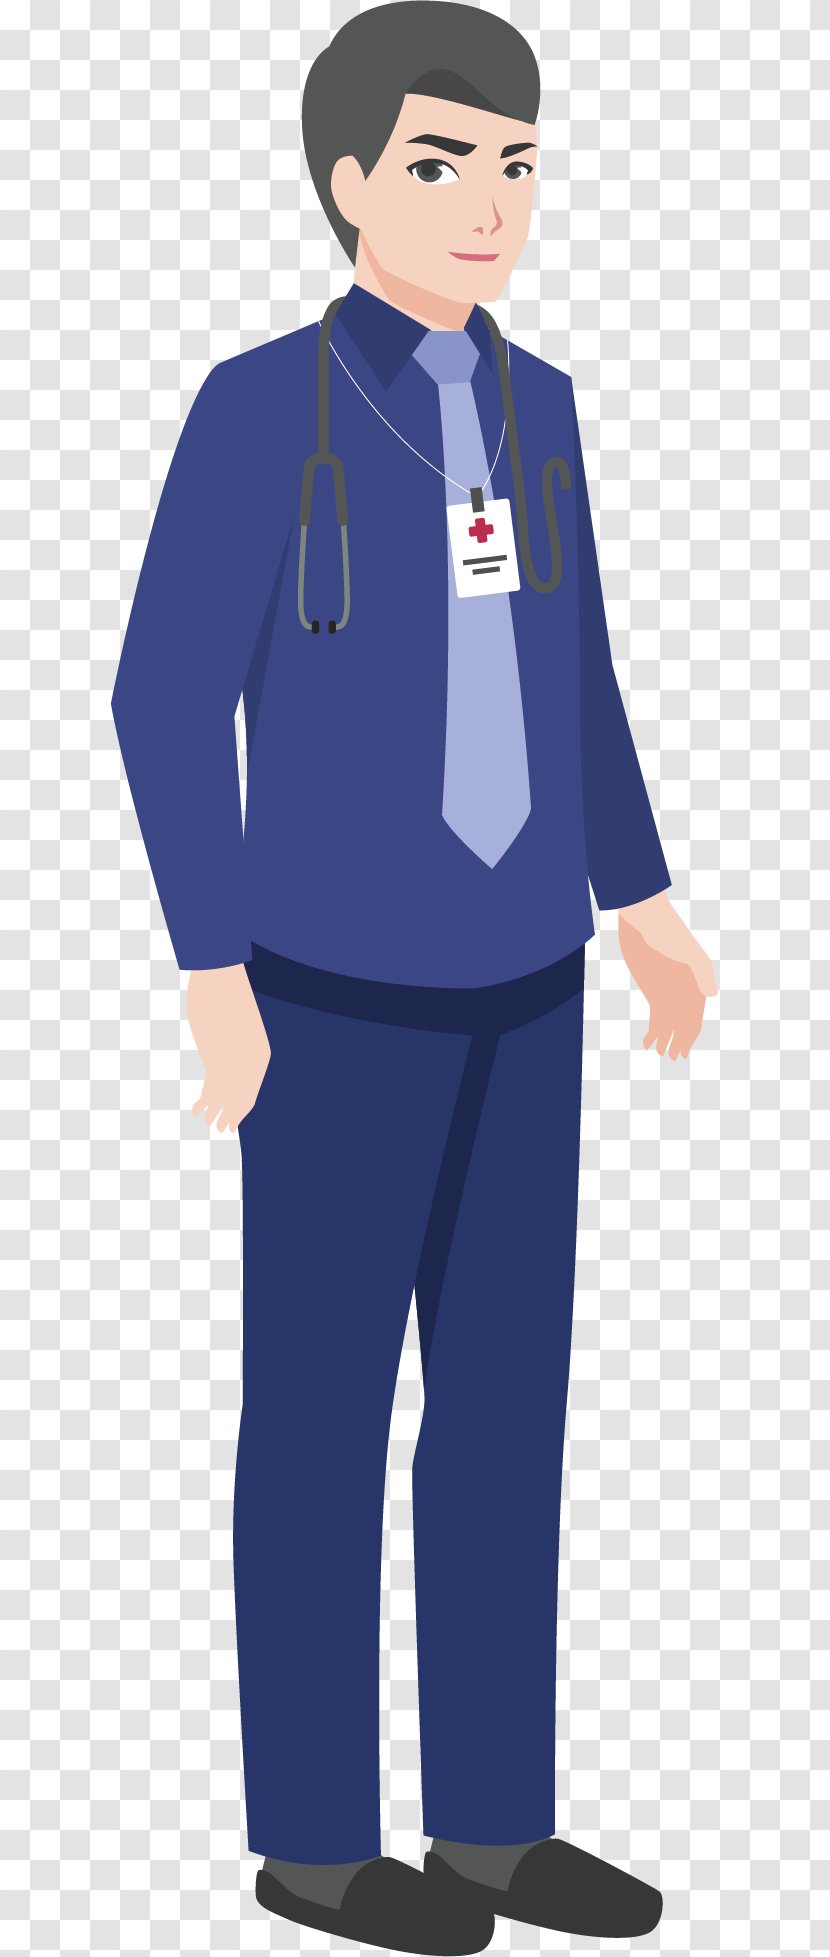 Physician Cartoon Illustration - Fictional Character - Say Hello To BLACK JACK Transparent PNG